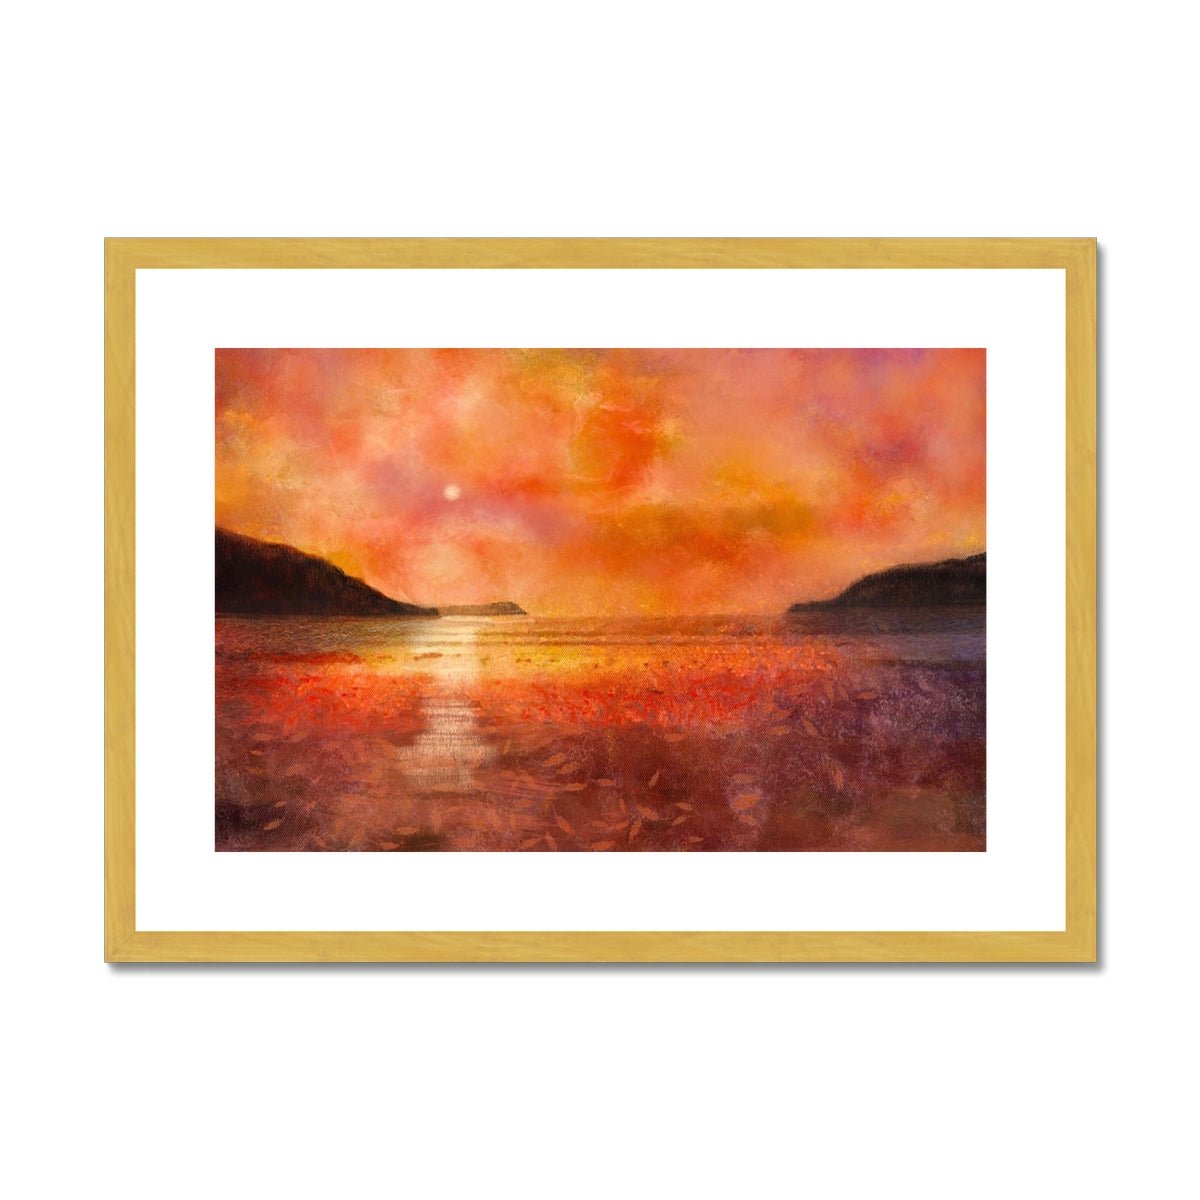 Calgary Beach Sunset Mull Painting | Antique Framed & Mounted Prints From Scotland-Antique Framed & Mounted Prints-Hebridean Islands Art Gallery-A2 Landscape-Gold Frame-Paintings, Prints, Homeware, Art Gifts From Scotland By Scottish Artist Kevin Hunter